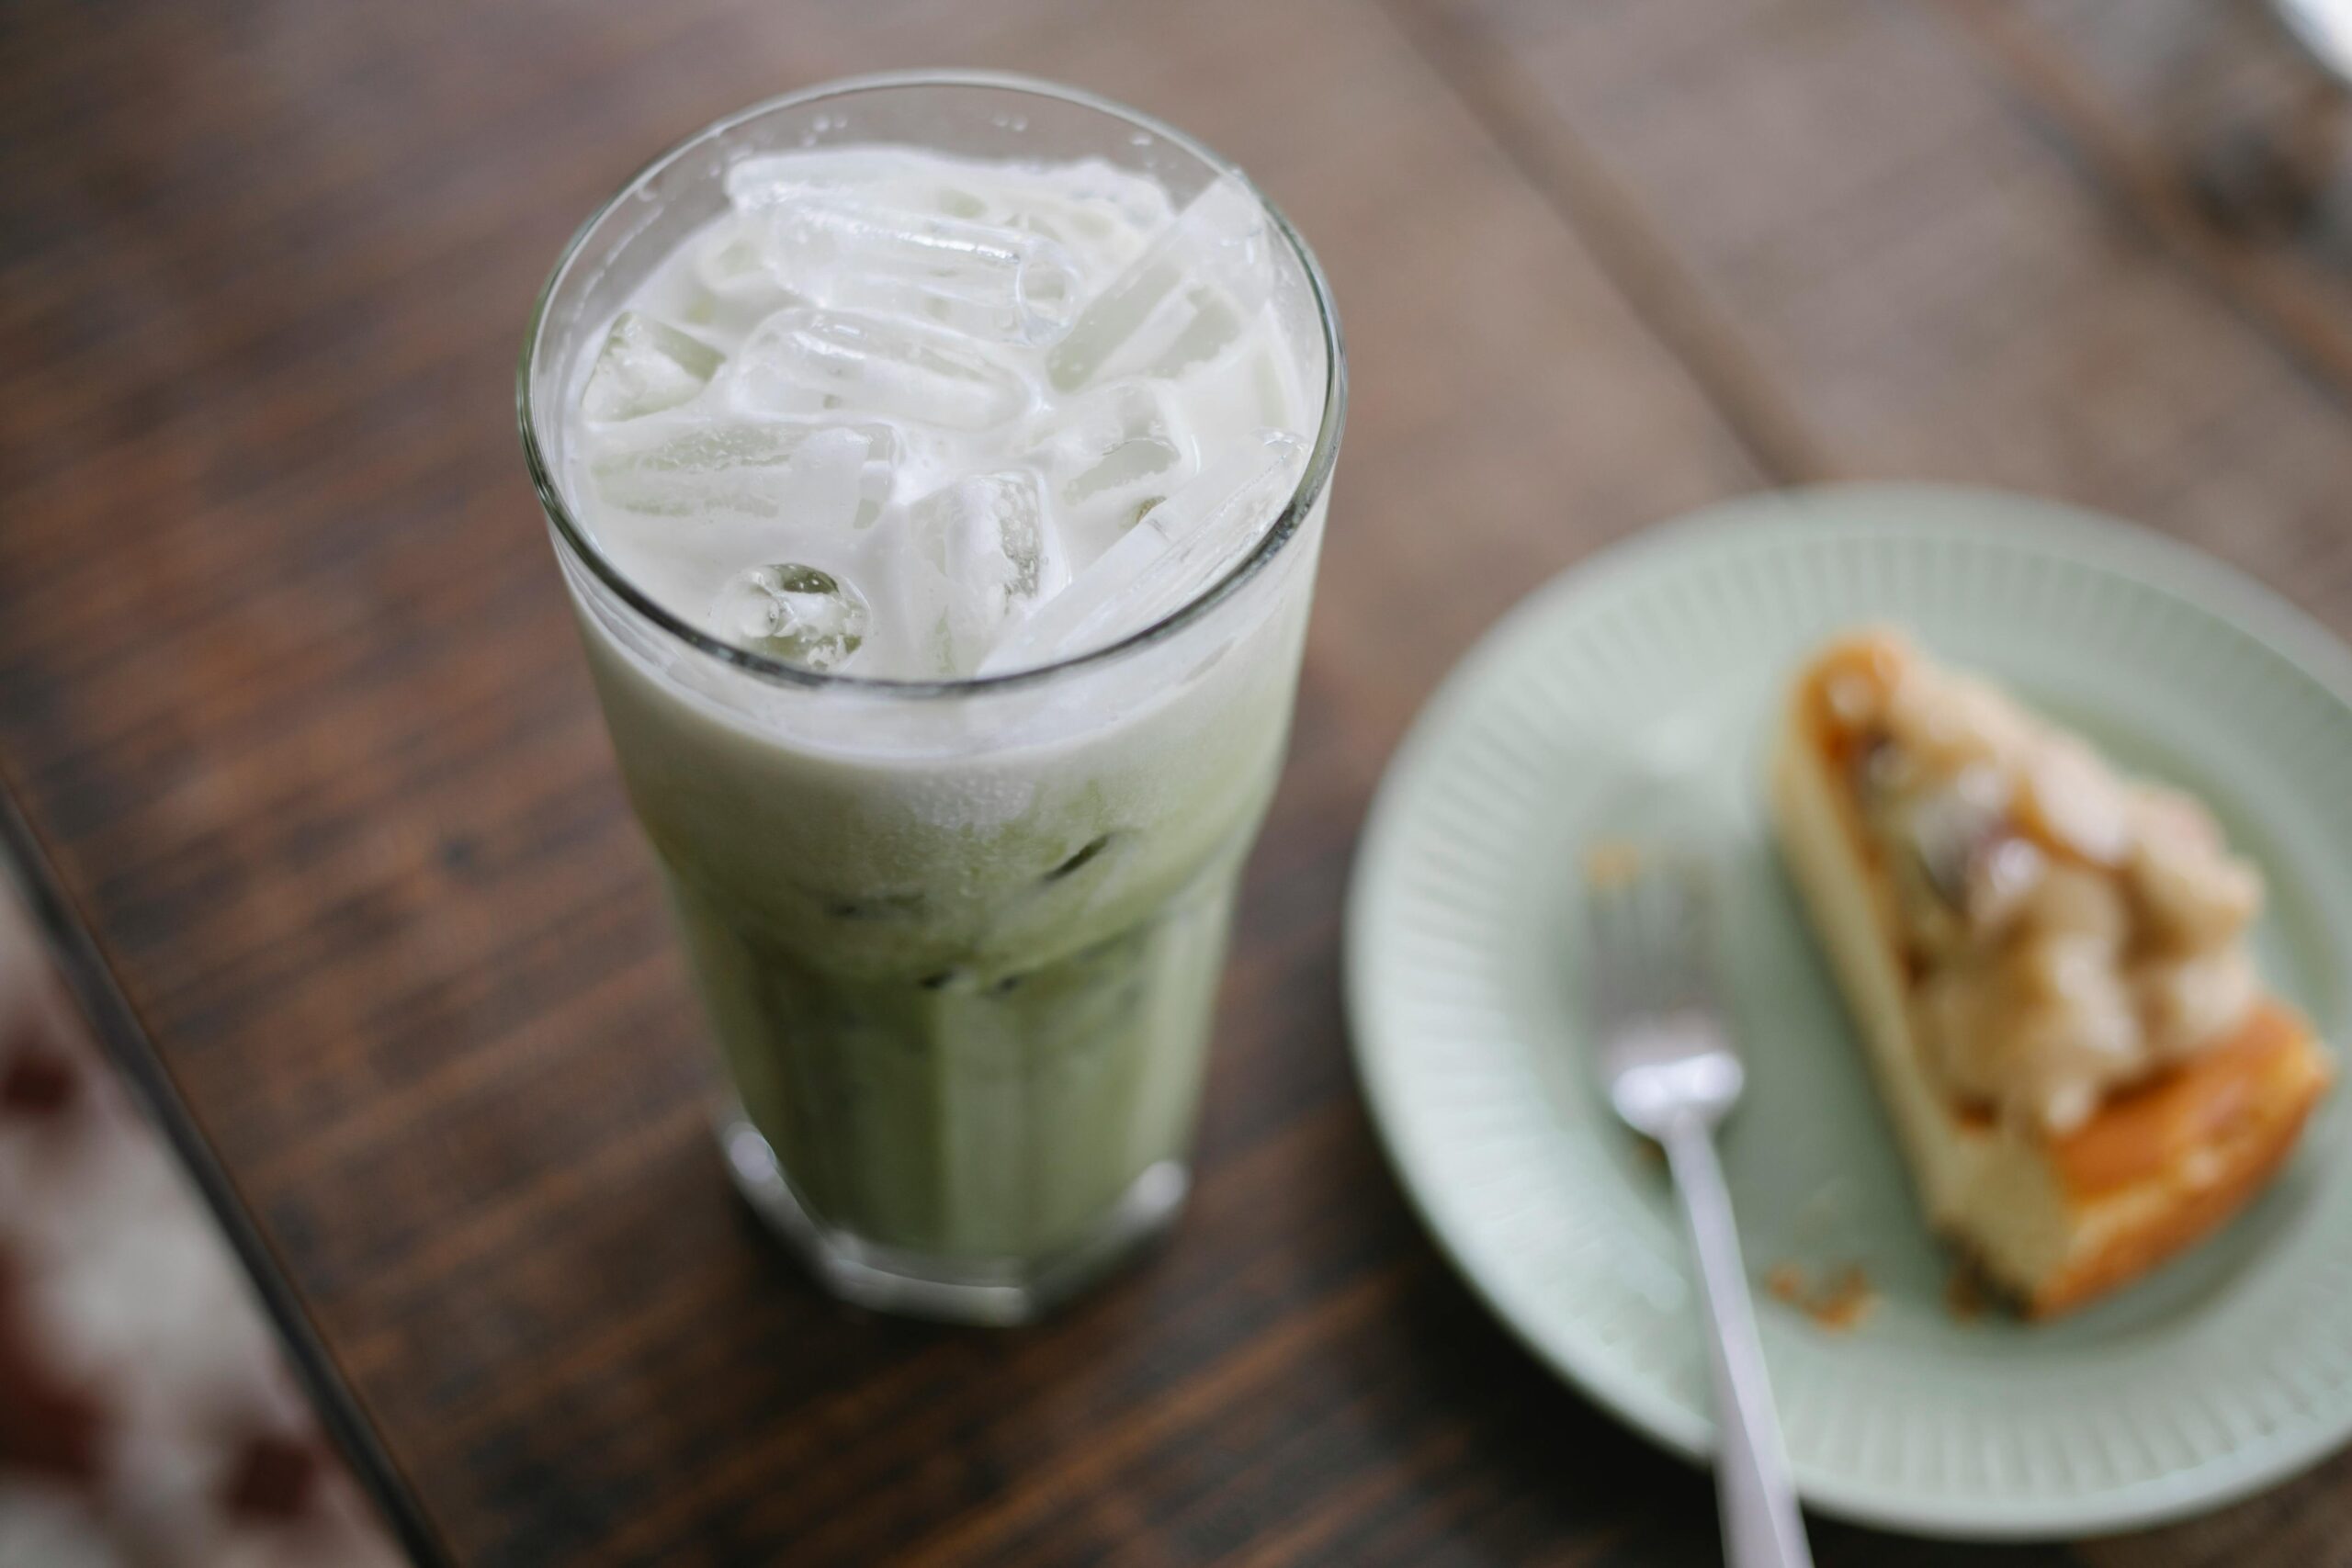 An iced matcha latte is a classic and easy matcha recipe. Pictured: An iced matcha latte